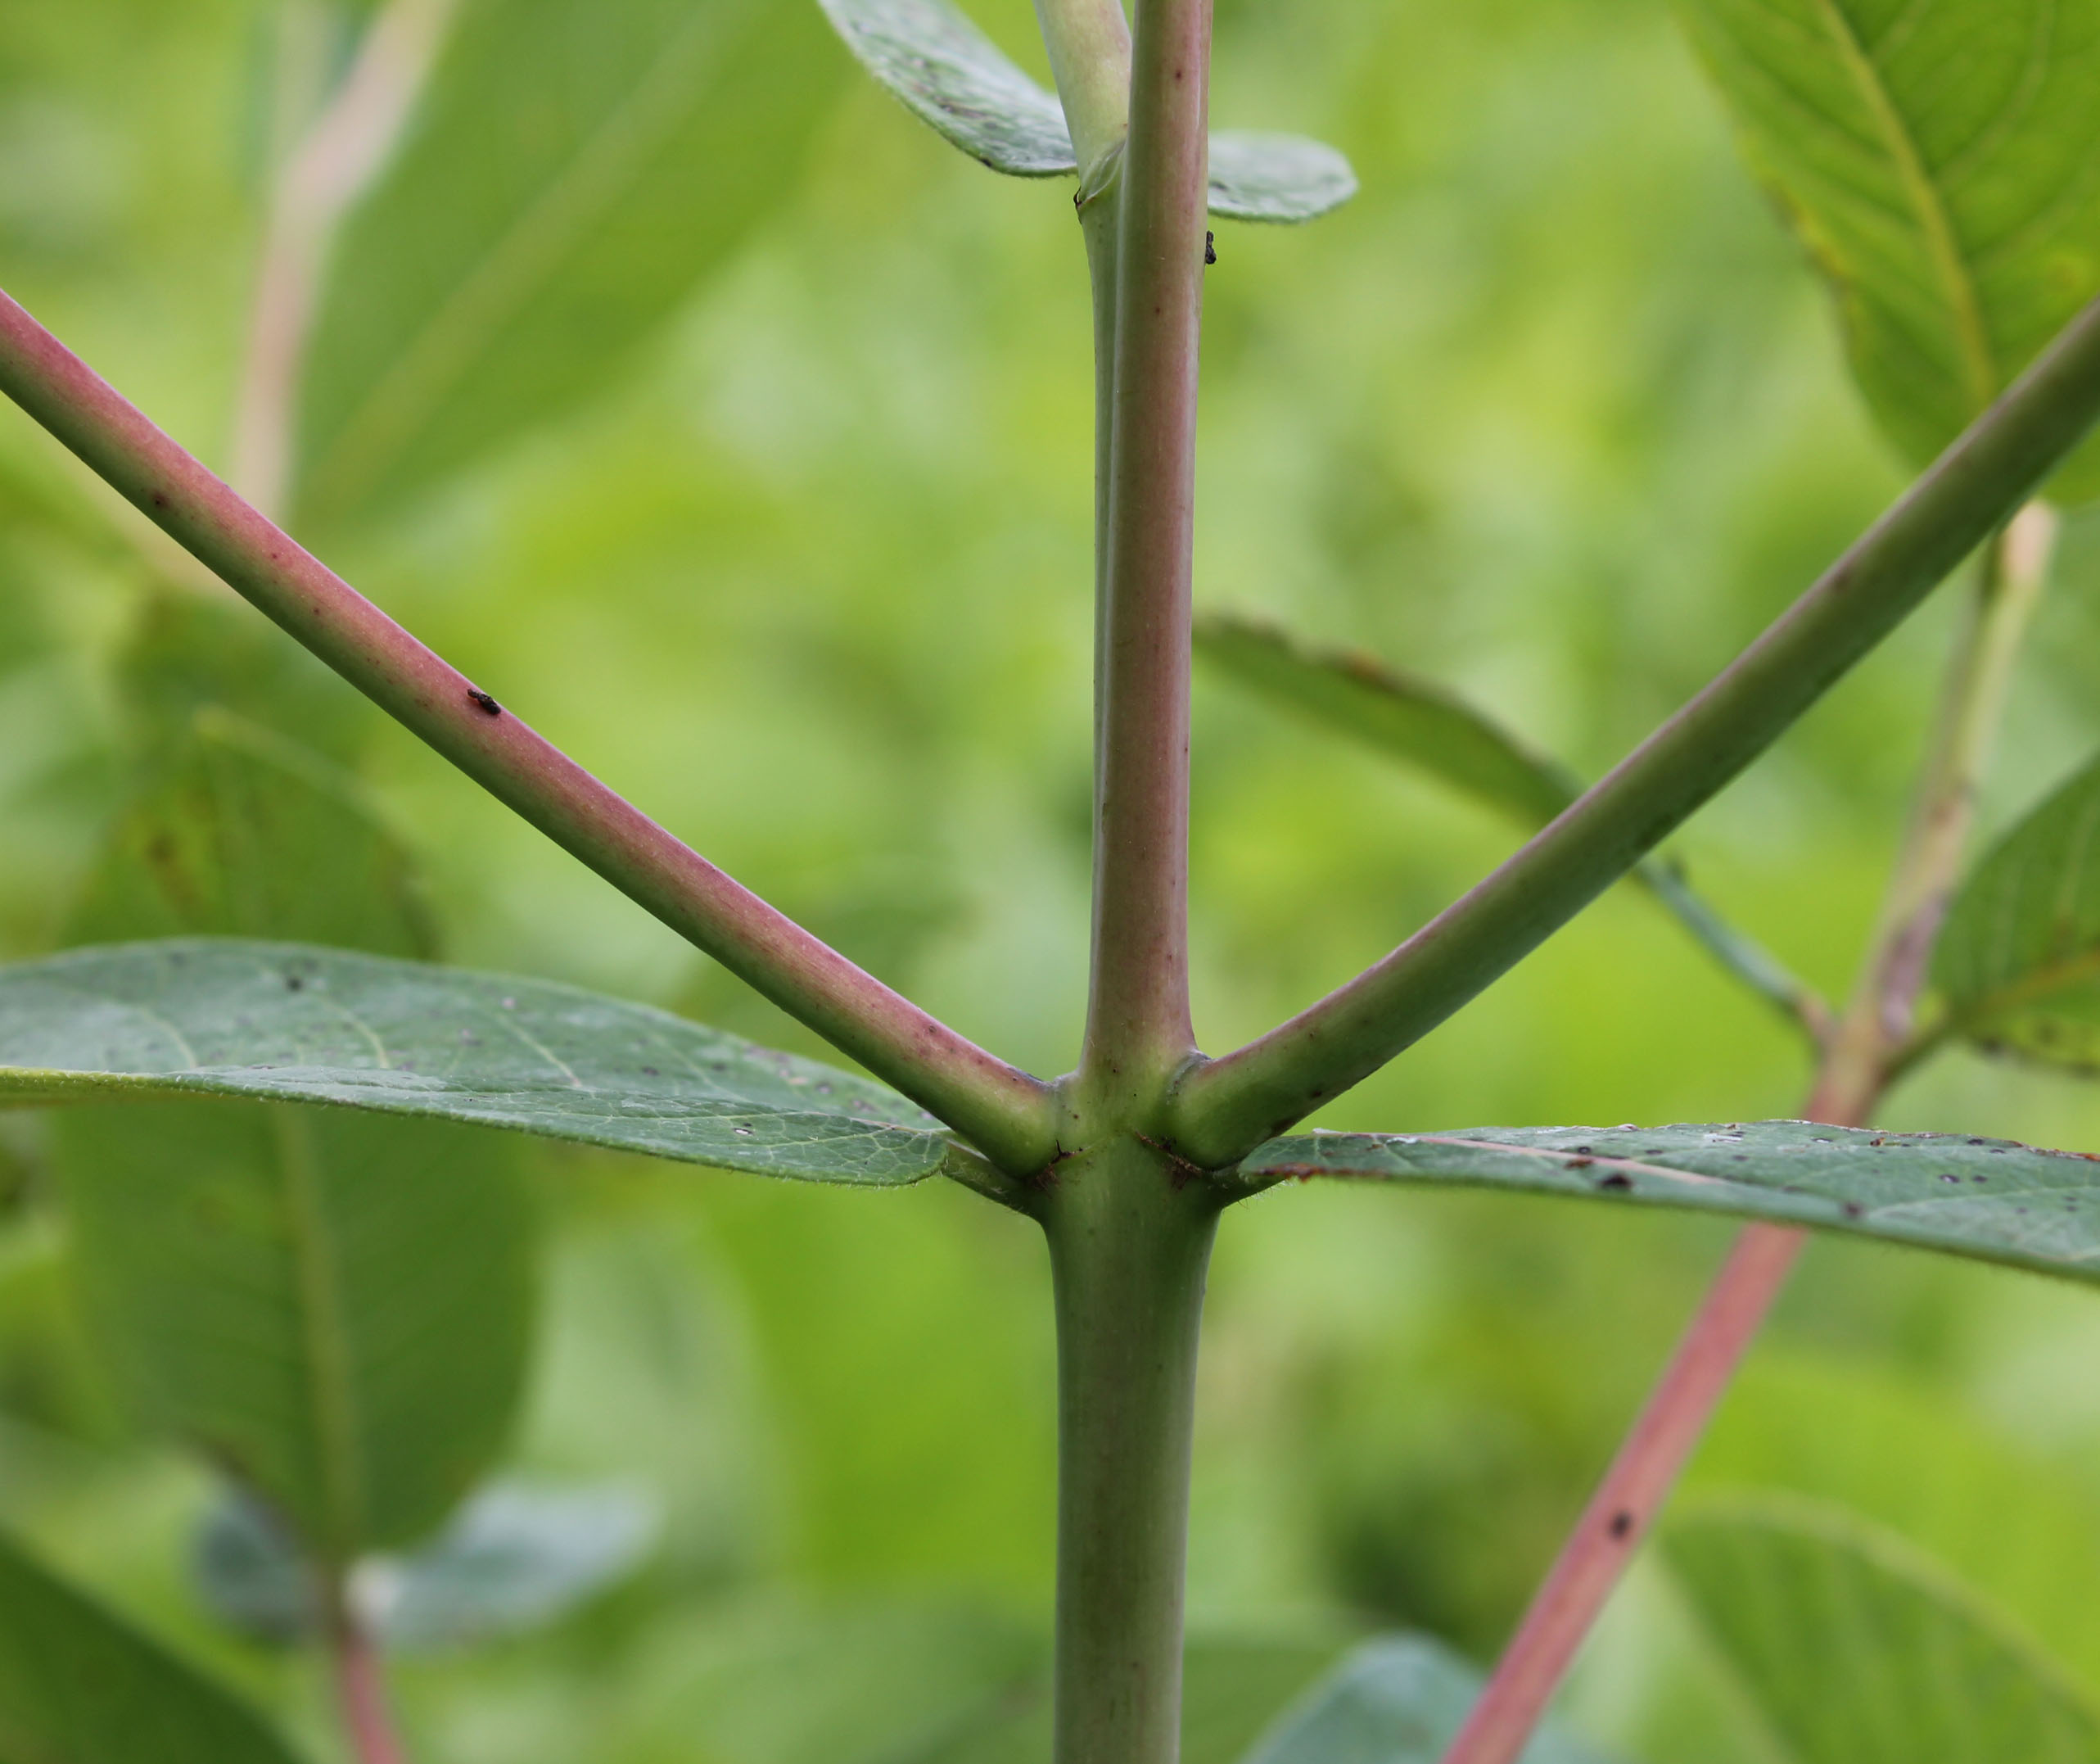 Leaves are orientated oppositely on the stem with two per node